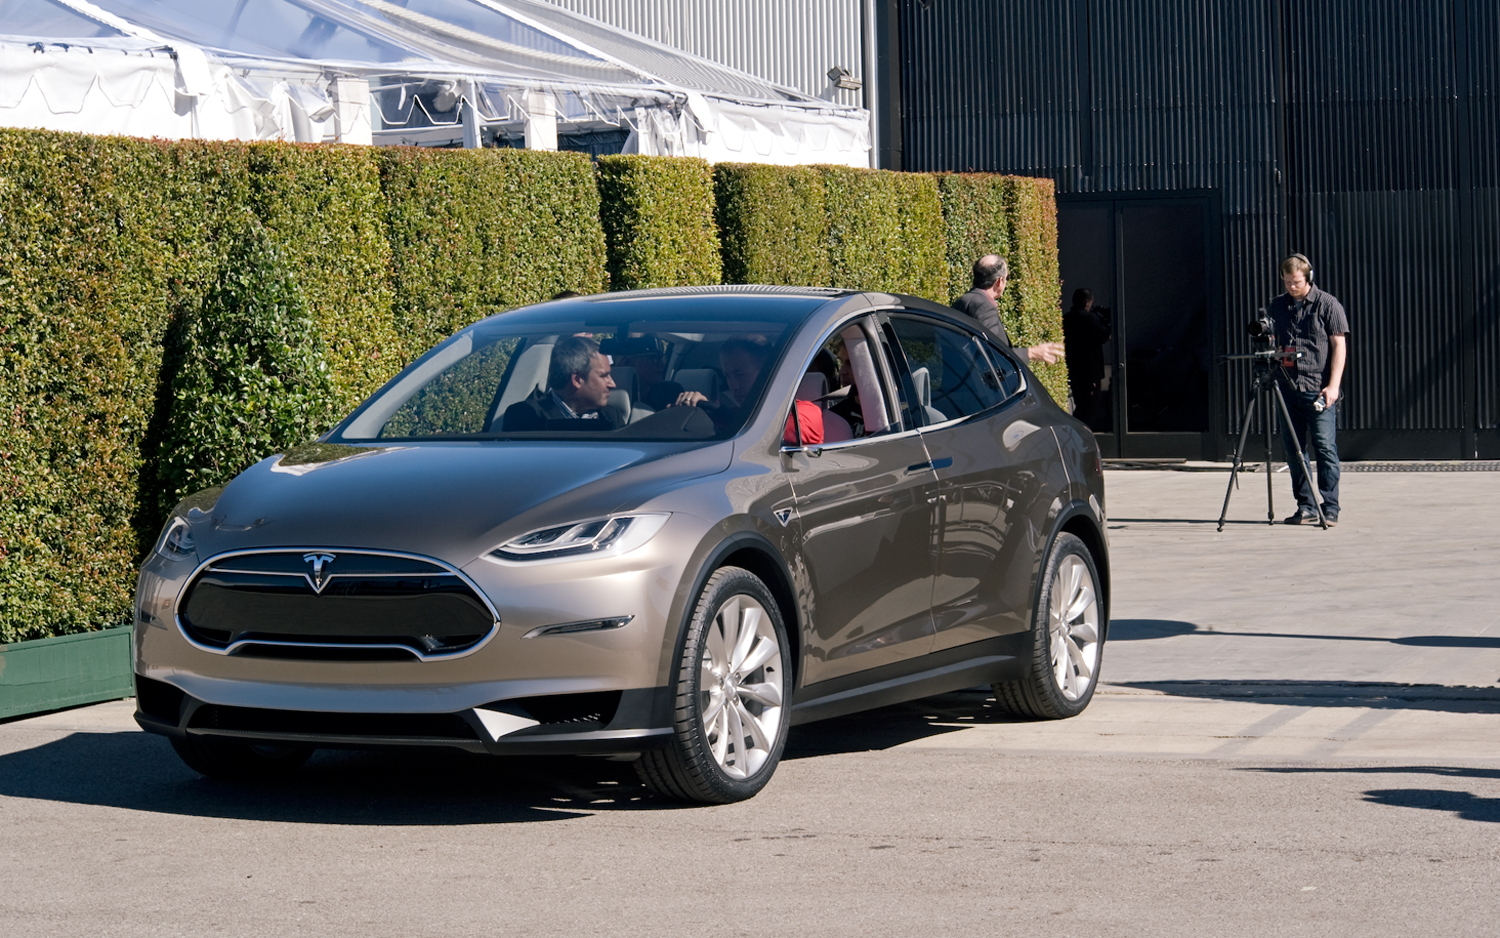 Elon Musk Signs Off on September 29th Release Date for Model X Crossover